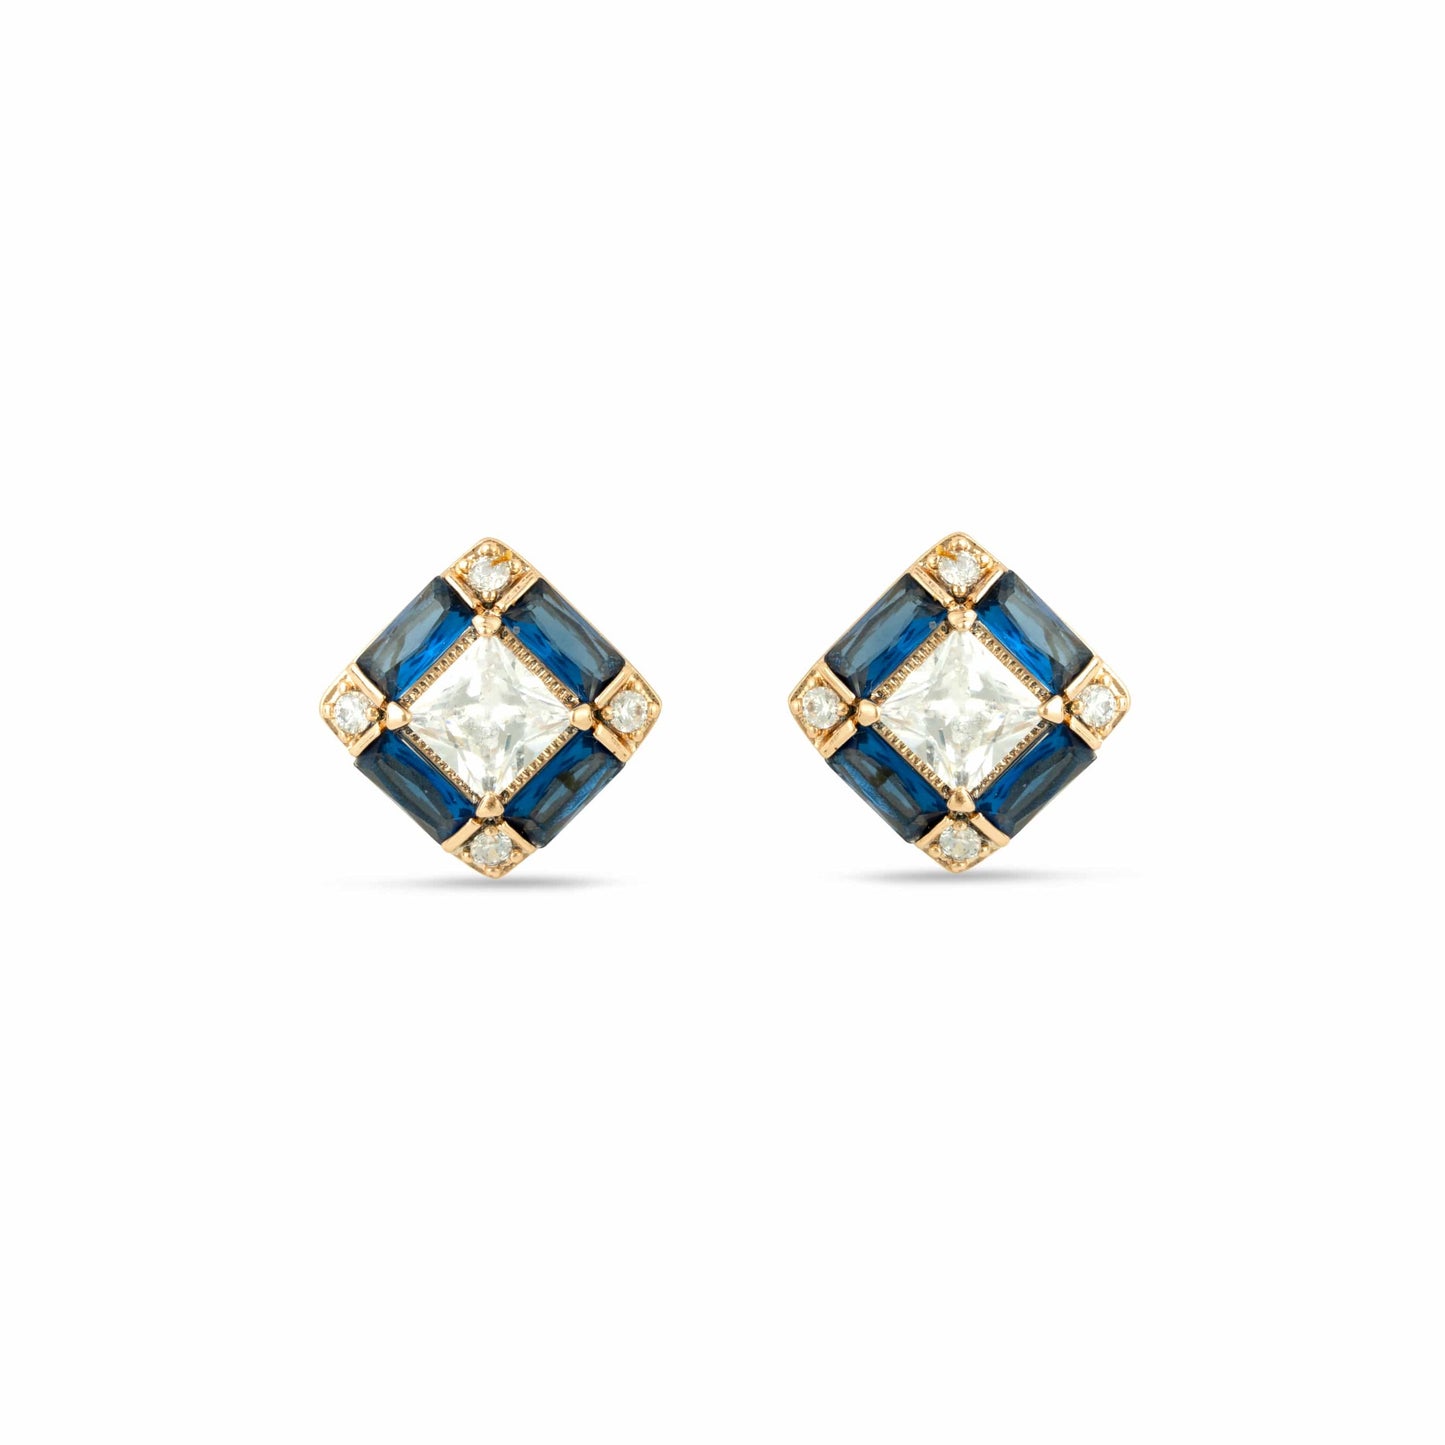 Gold Stud Earrings with Blue and Clear Cubic Zirconia Crystals - Love & Lilly Jewellery